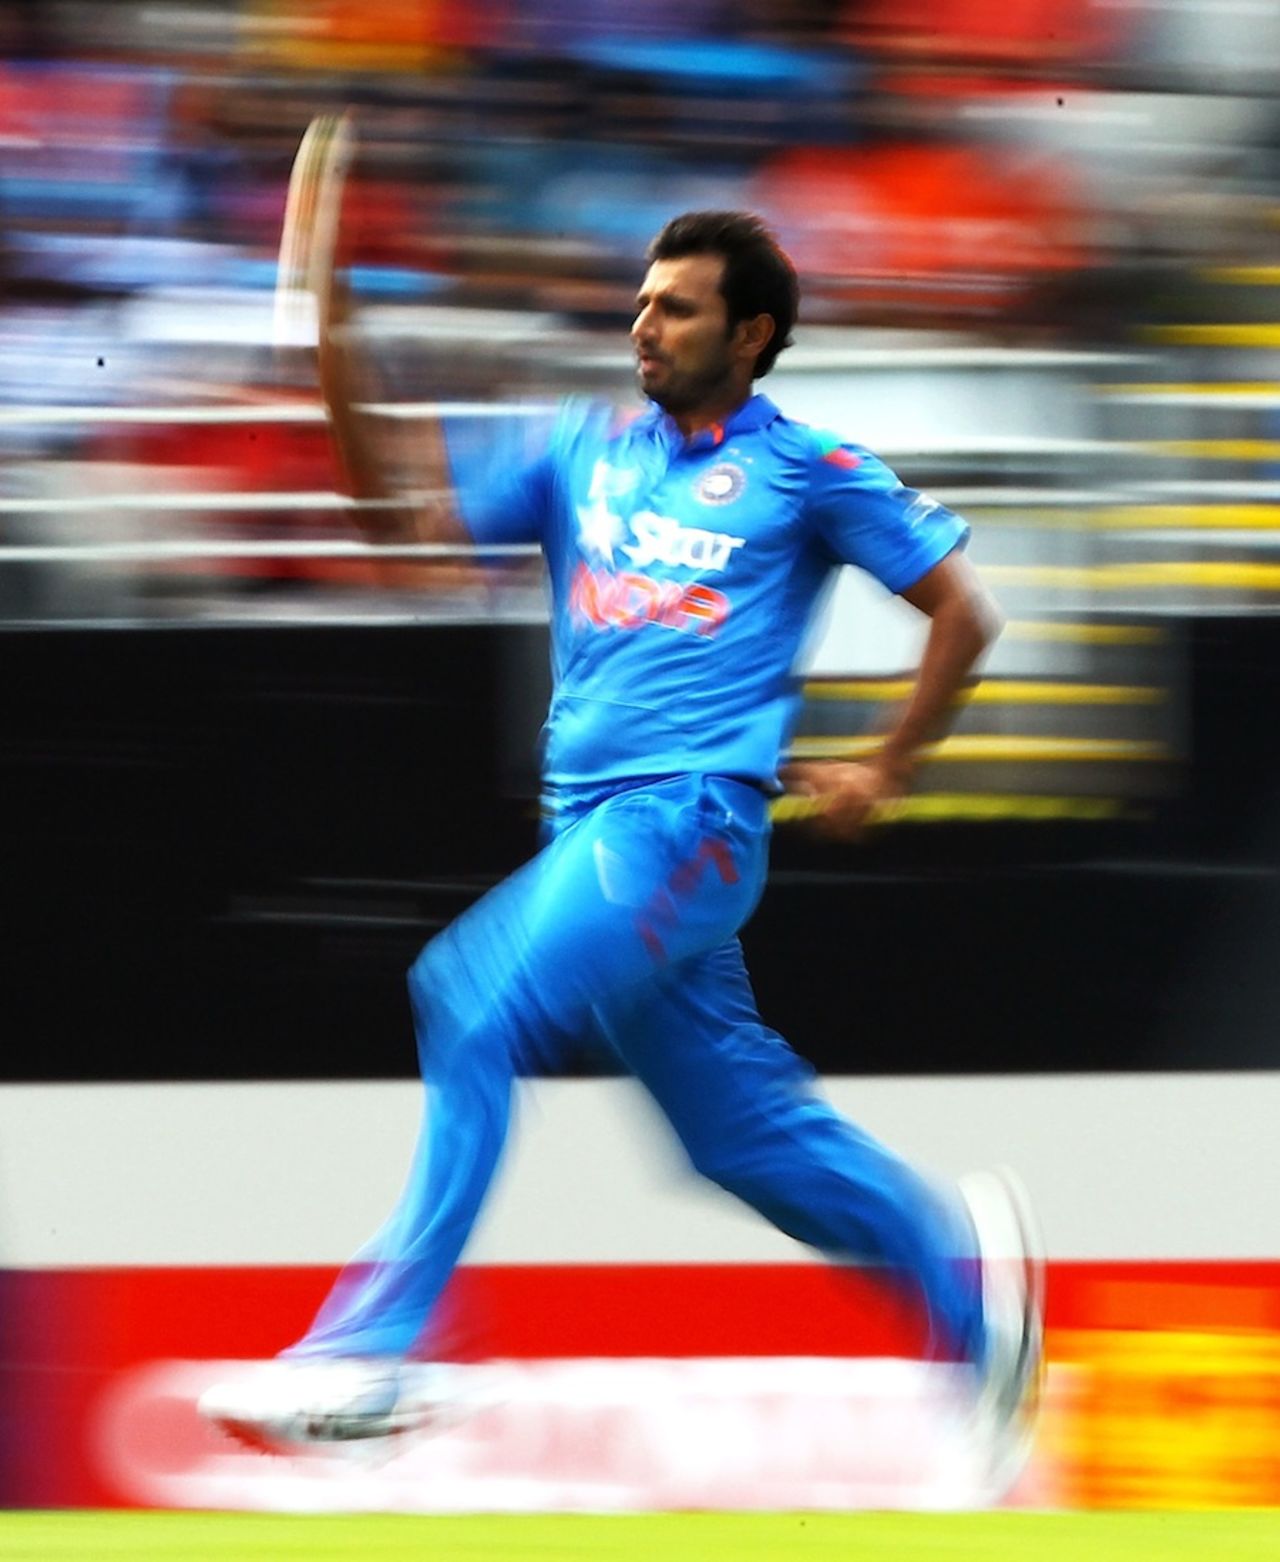 Mohammed Shami had a poor day despite taking two wickets, New Zealand v India, 3rd ODI, Auckland, January 25, 2014